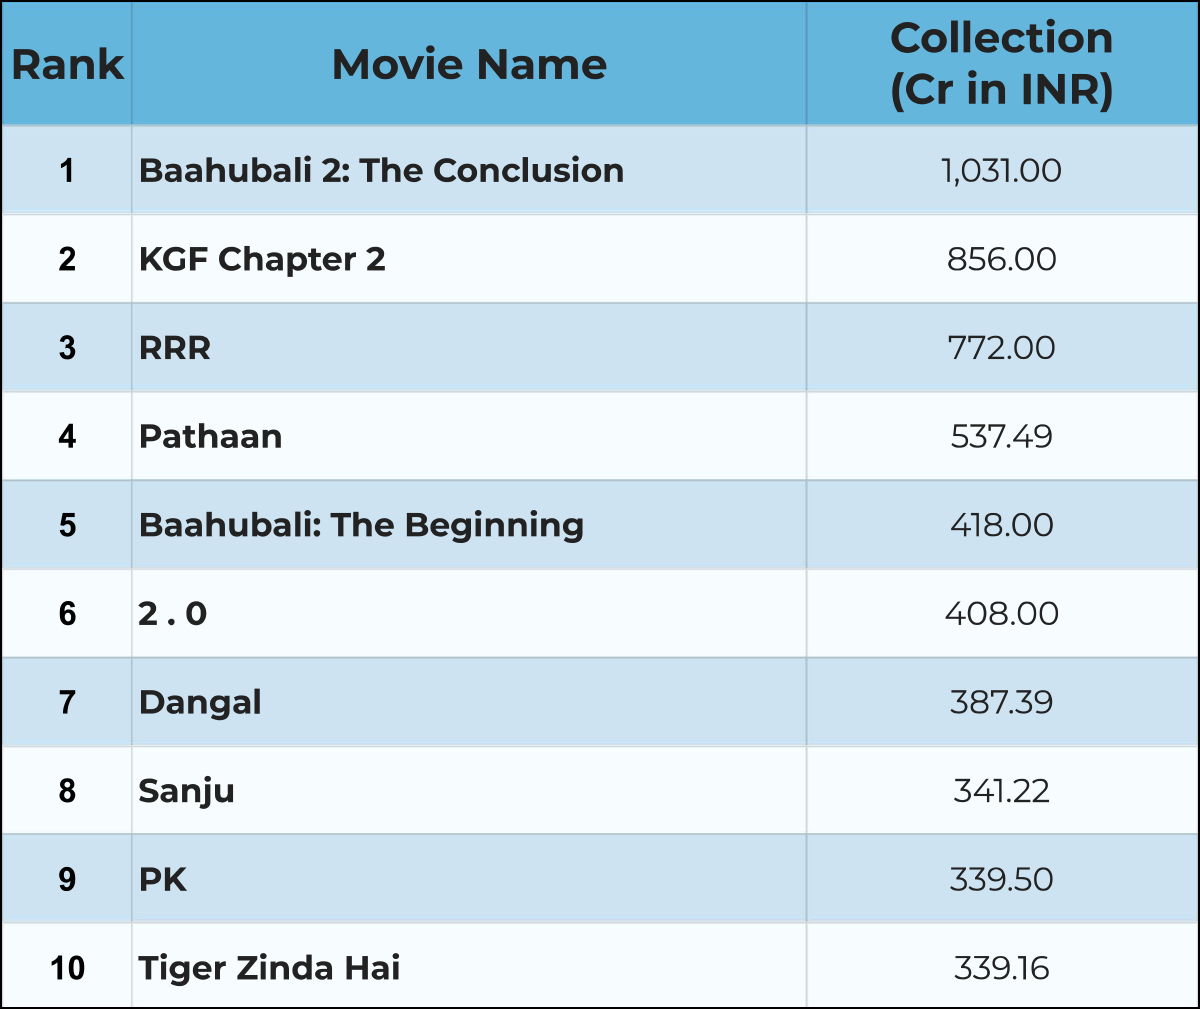 Highest Grossing Movies In India (All Languages)